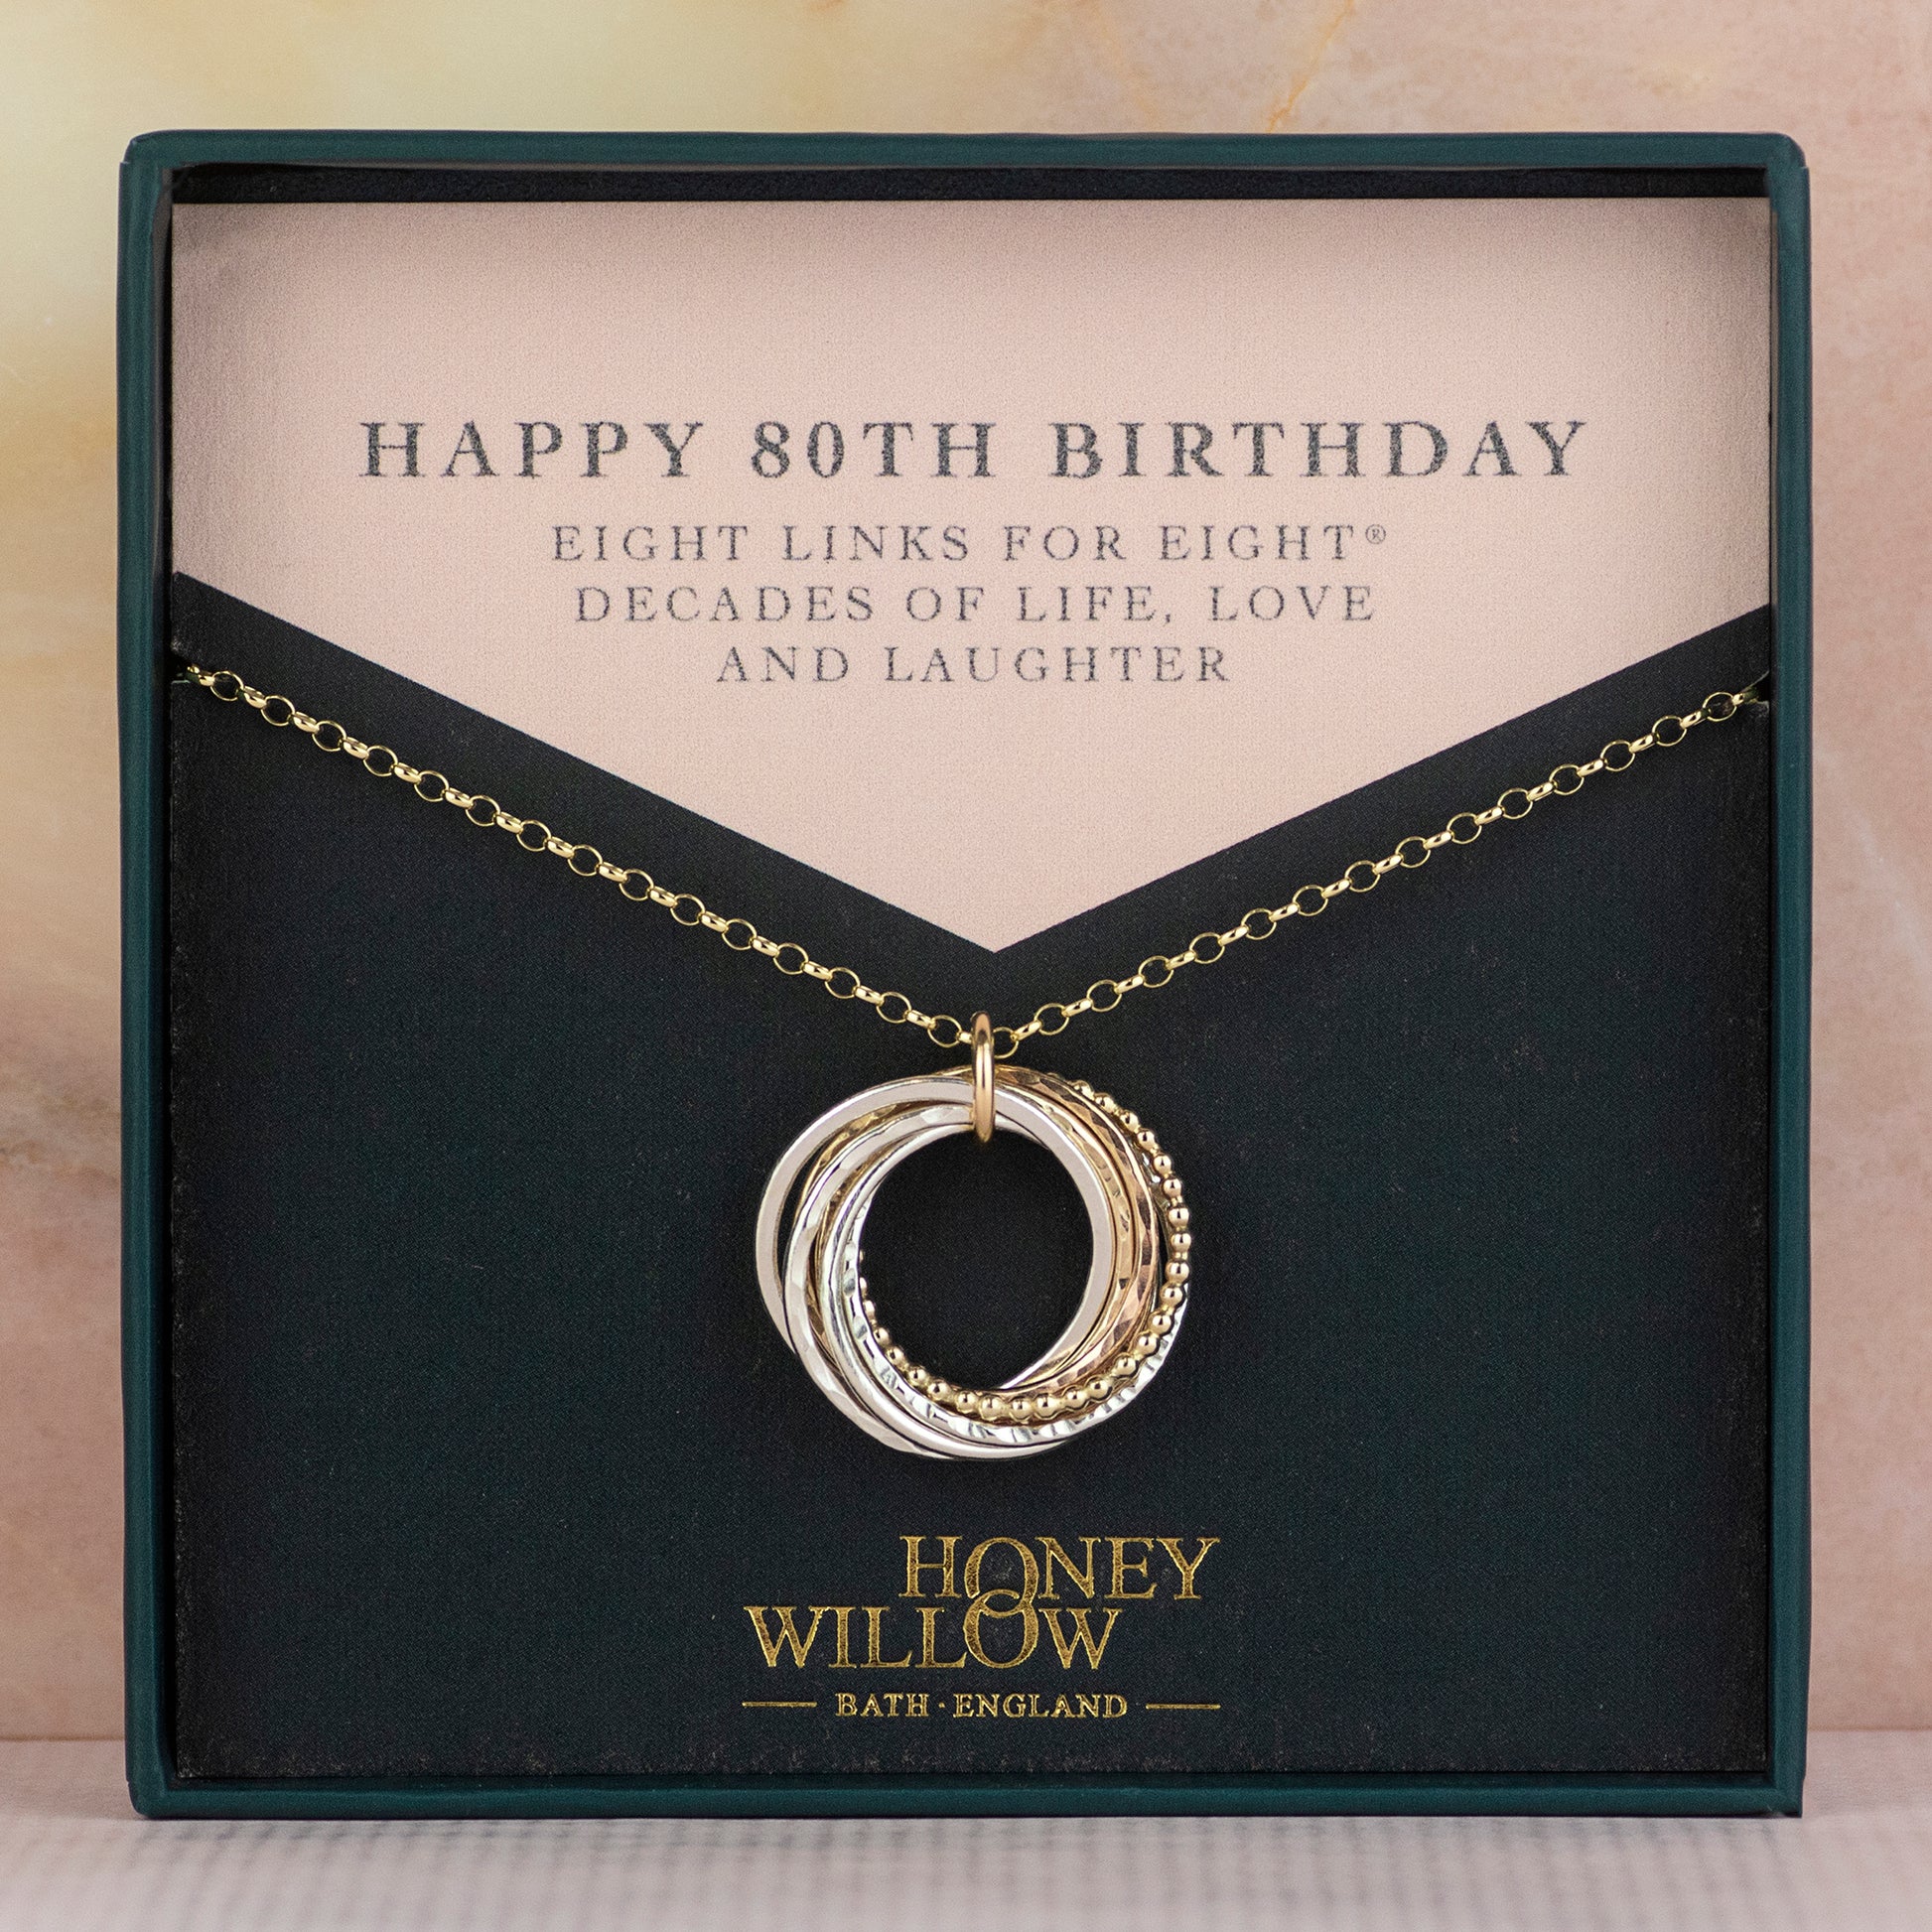 9kt Gold 80th Birthday Necklace - The Original 8 Links for 8 Decades Necklace - Recycled Gold, Rose Gold & Silver